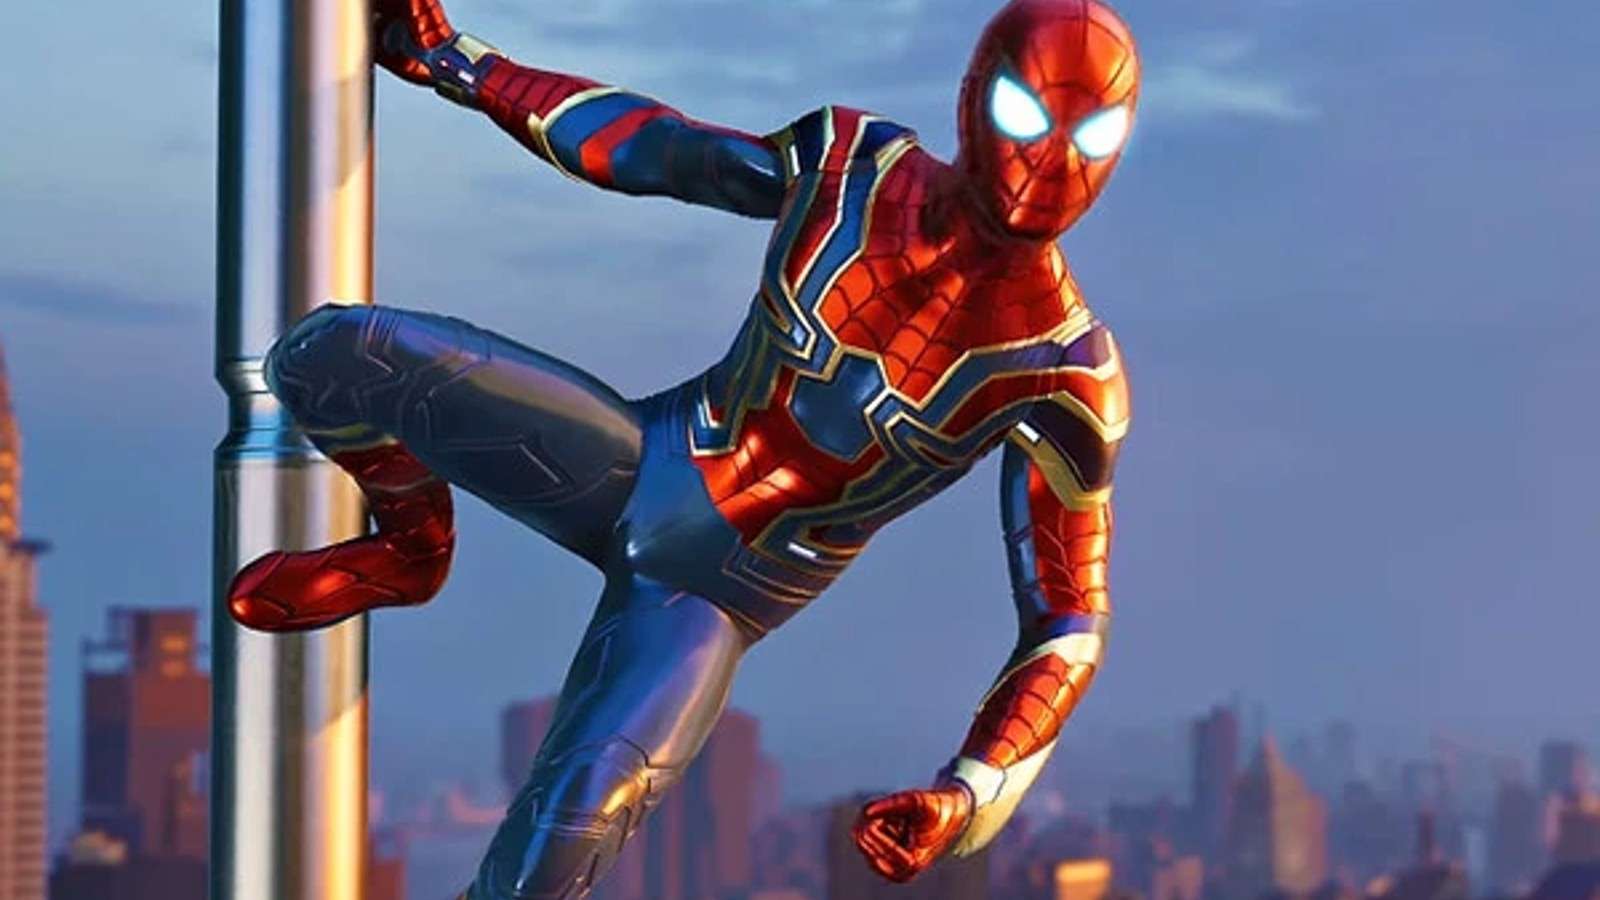 An image of Spider-Man wearing the Iron Spider suit.